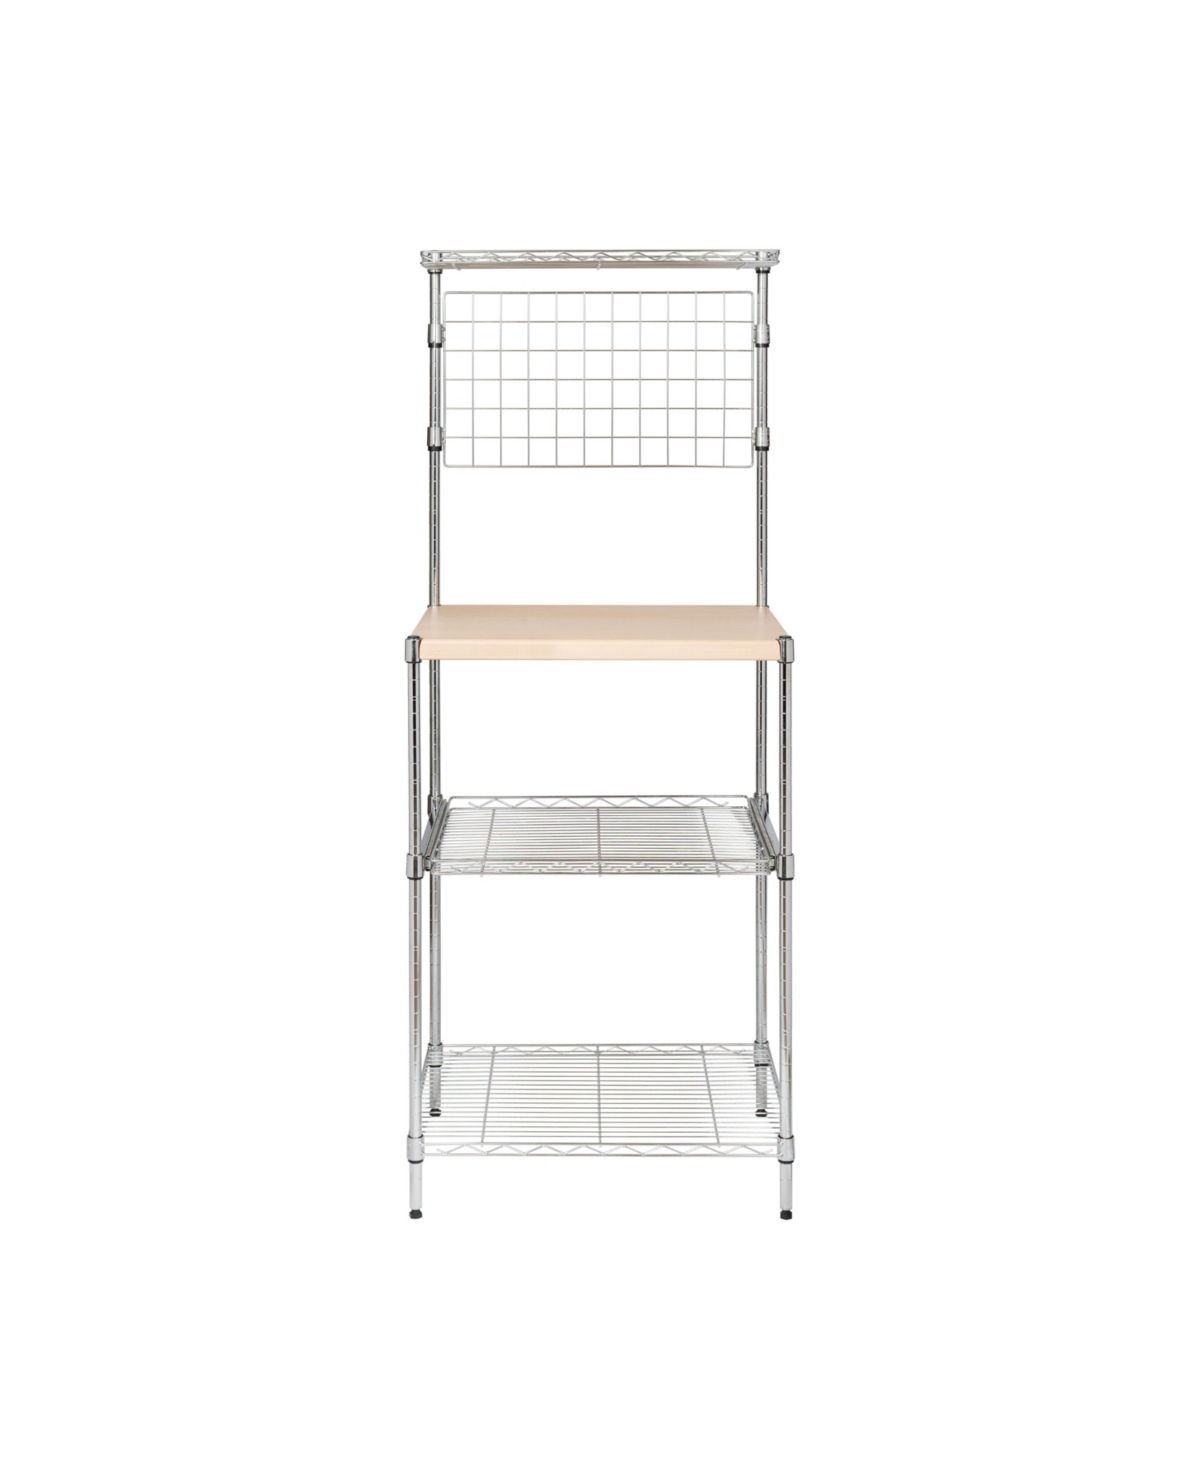 Shop Honey Can Do Microwave Shelving Unit With Shelves In Chrome